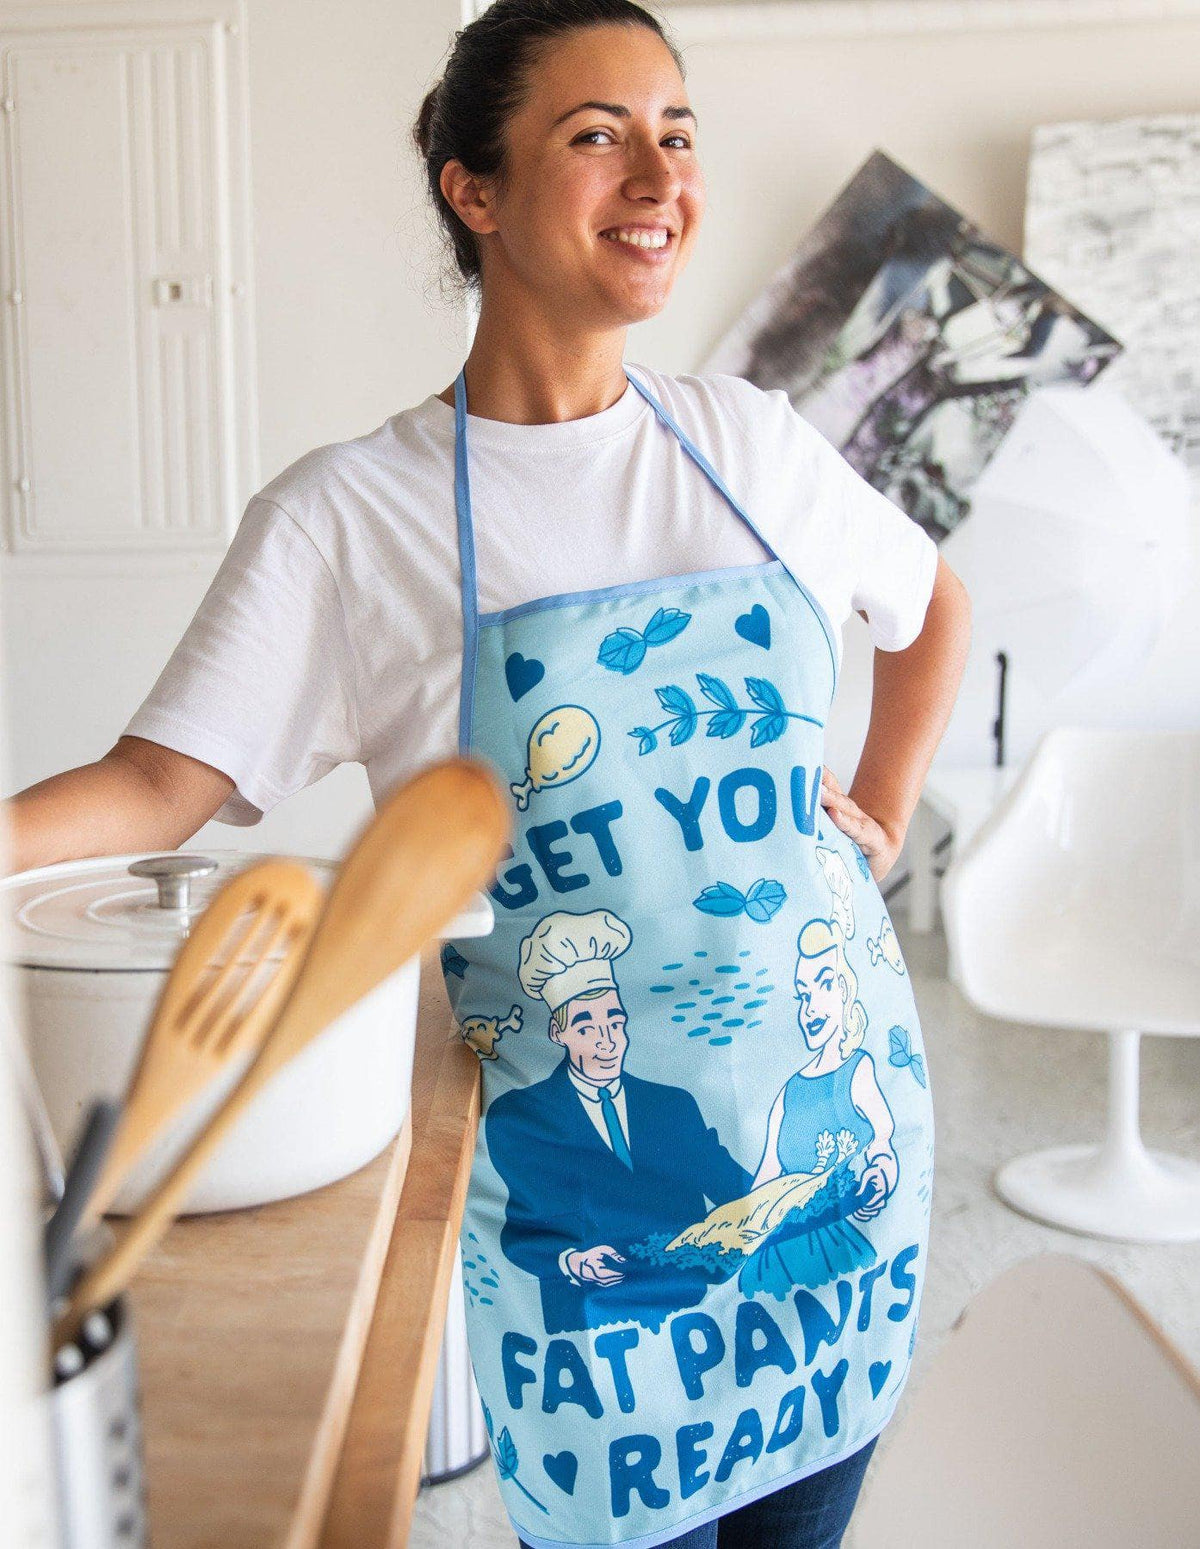 Get Your Fat Pants Ready Oven Mitt + Apron - Crazy Dog T-Shirts